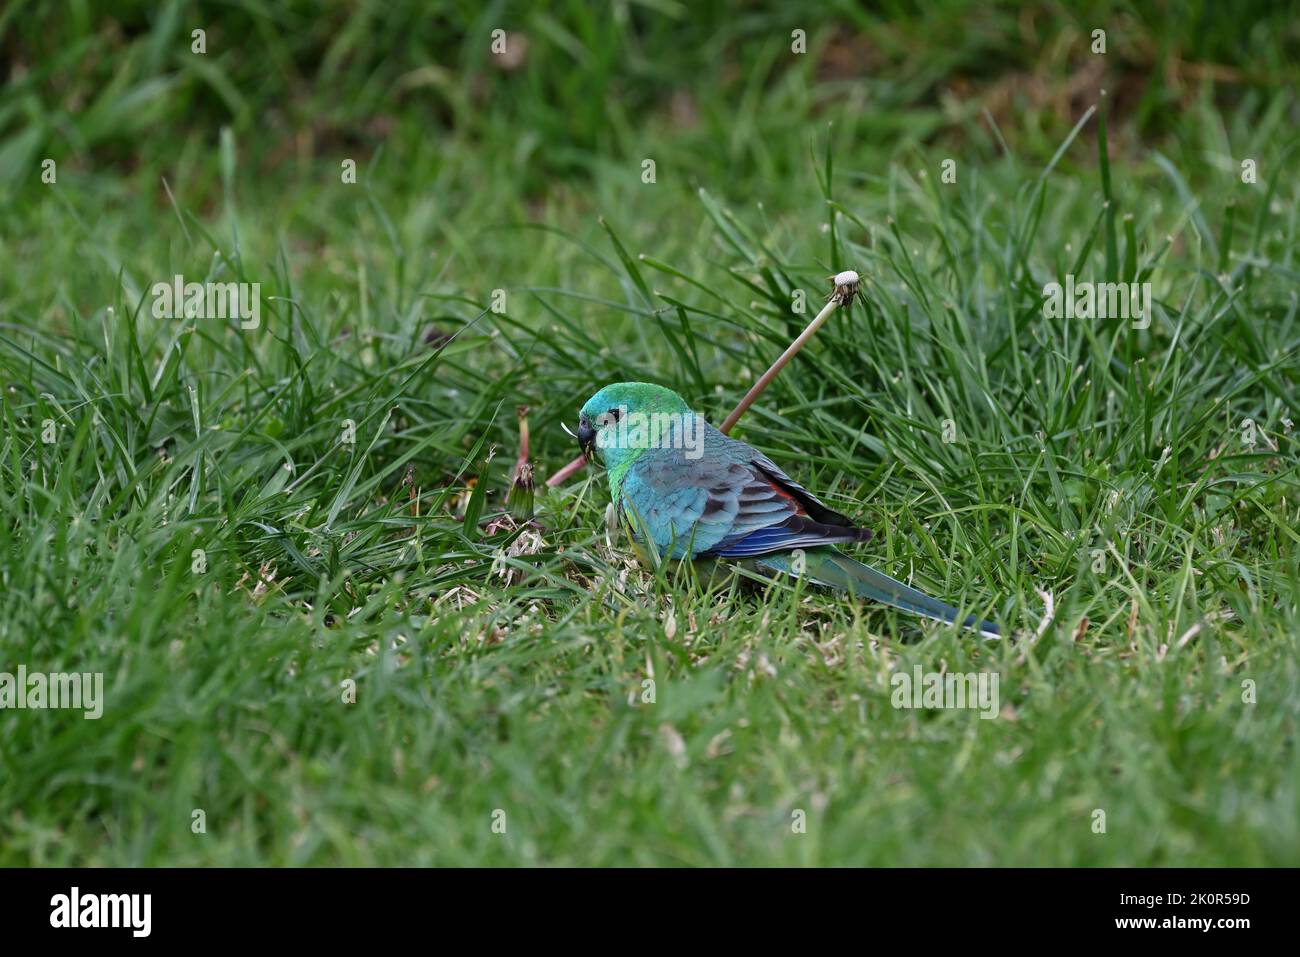 Predominantly green red-rumped parrot standing in unkempt grass as it chews on seeds Stock Photo